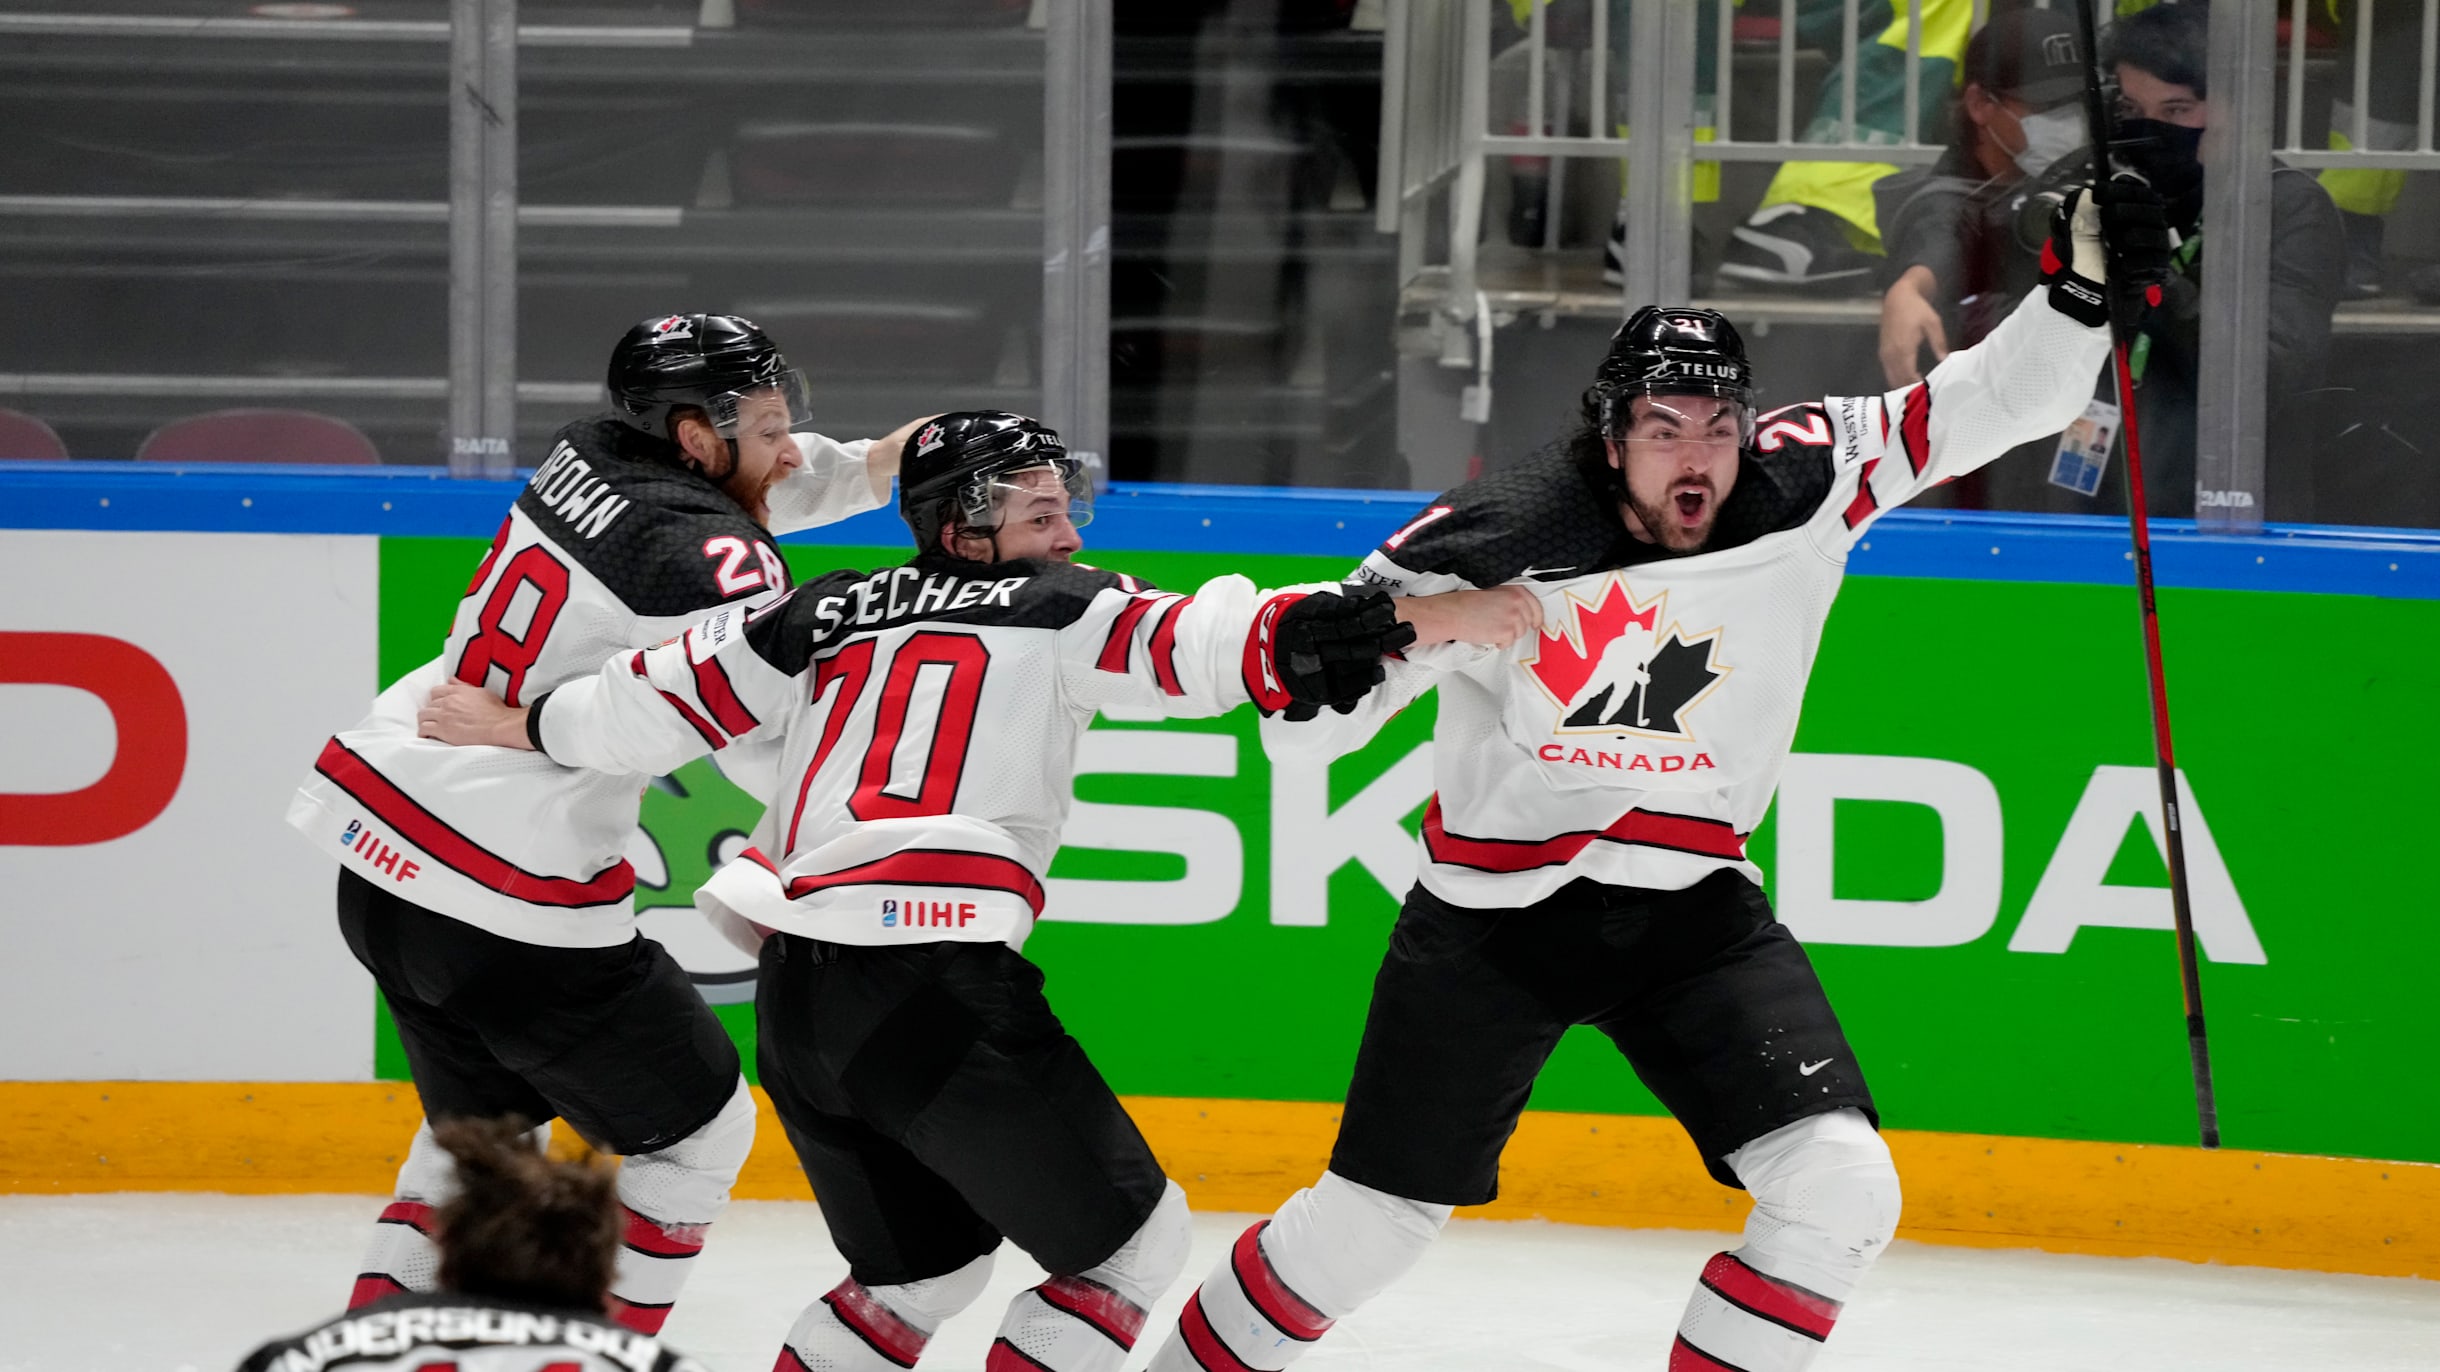 Canada almost fail, but recover to win the 2021 Ice Hockey World Championship